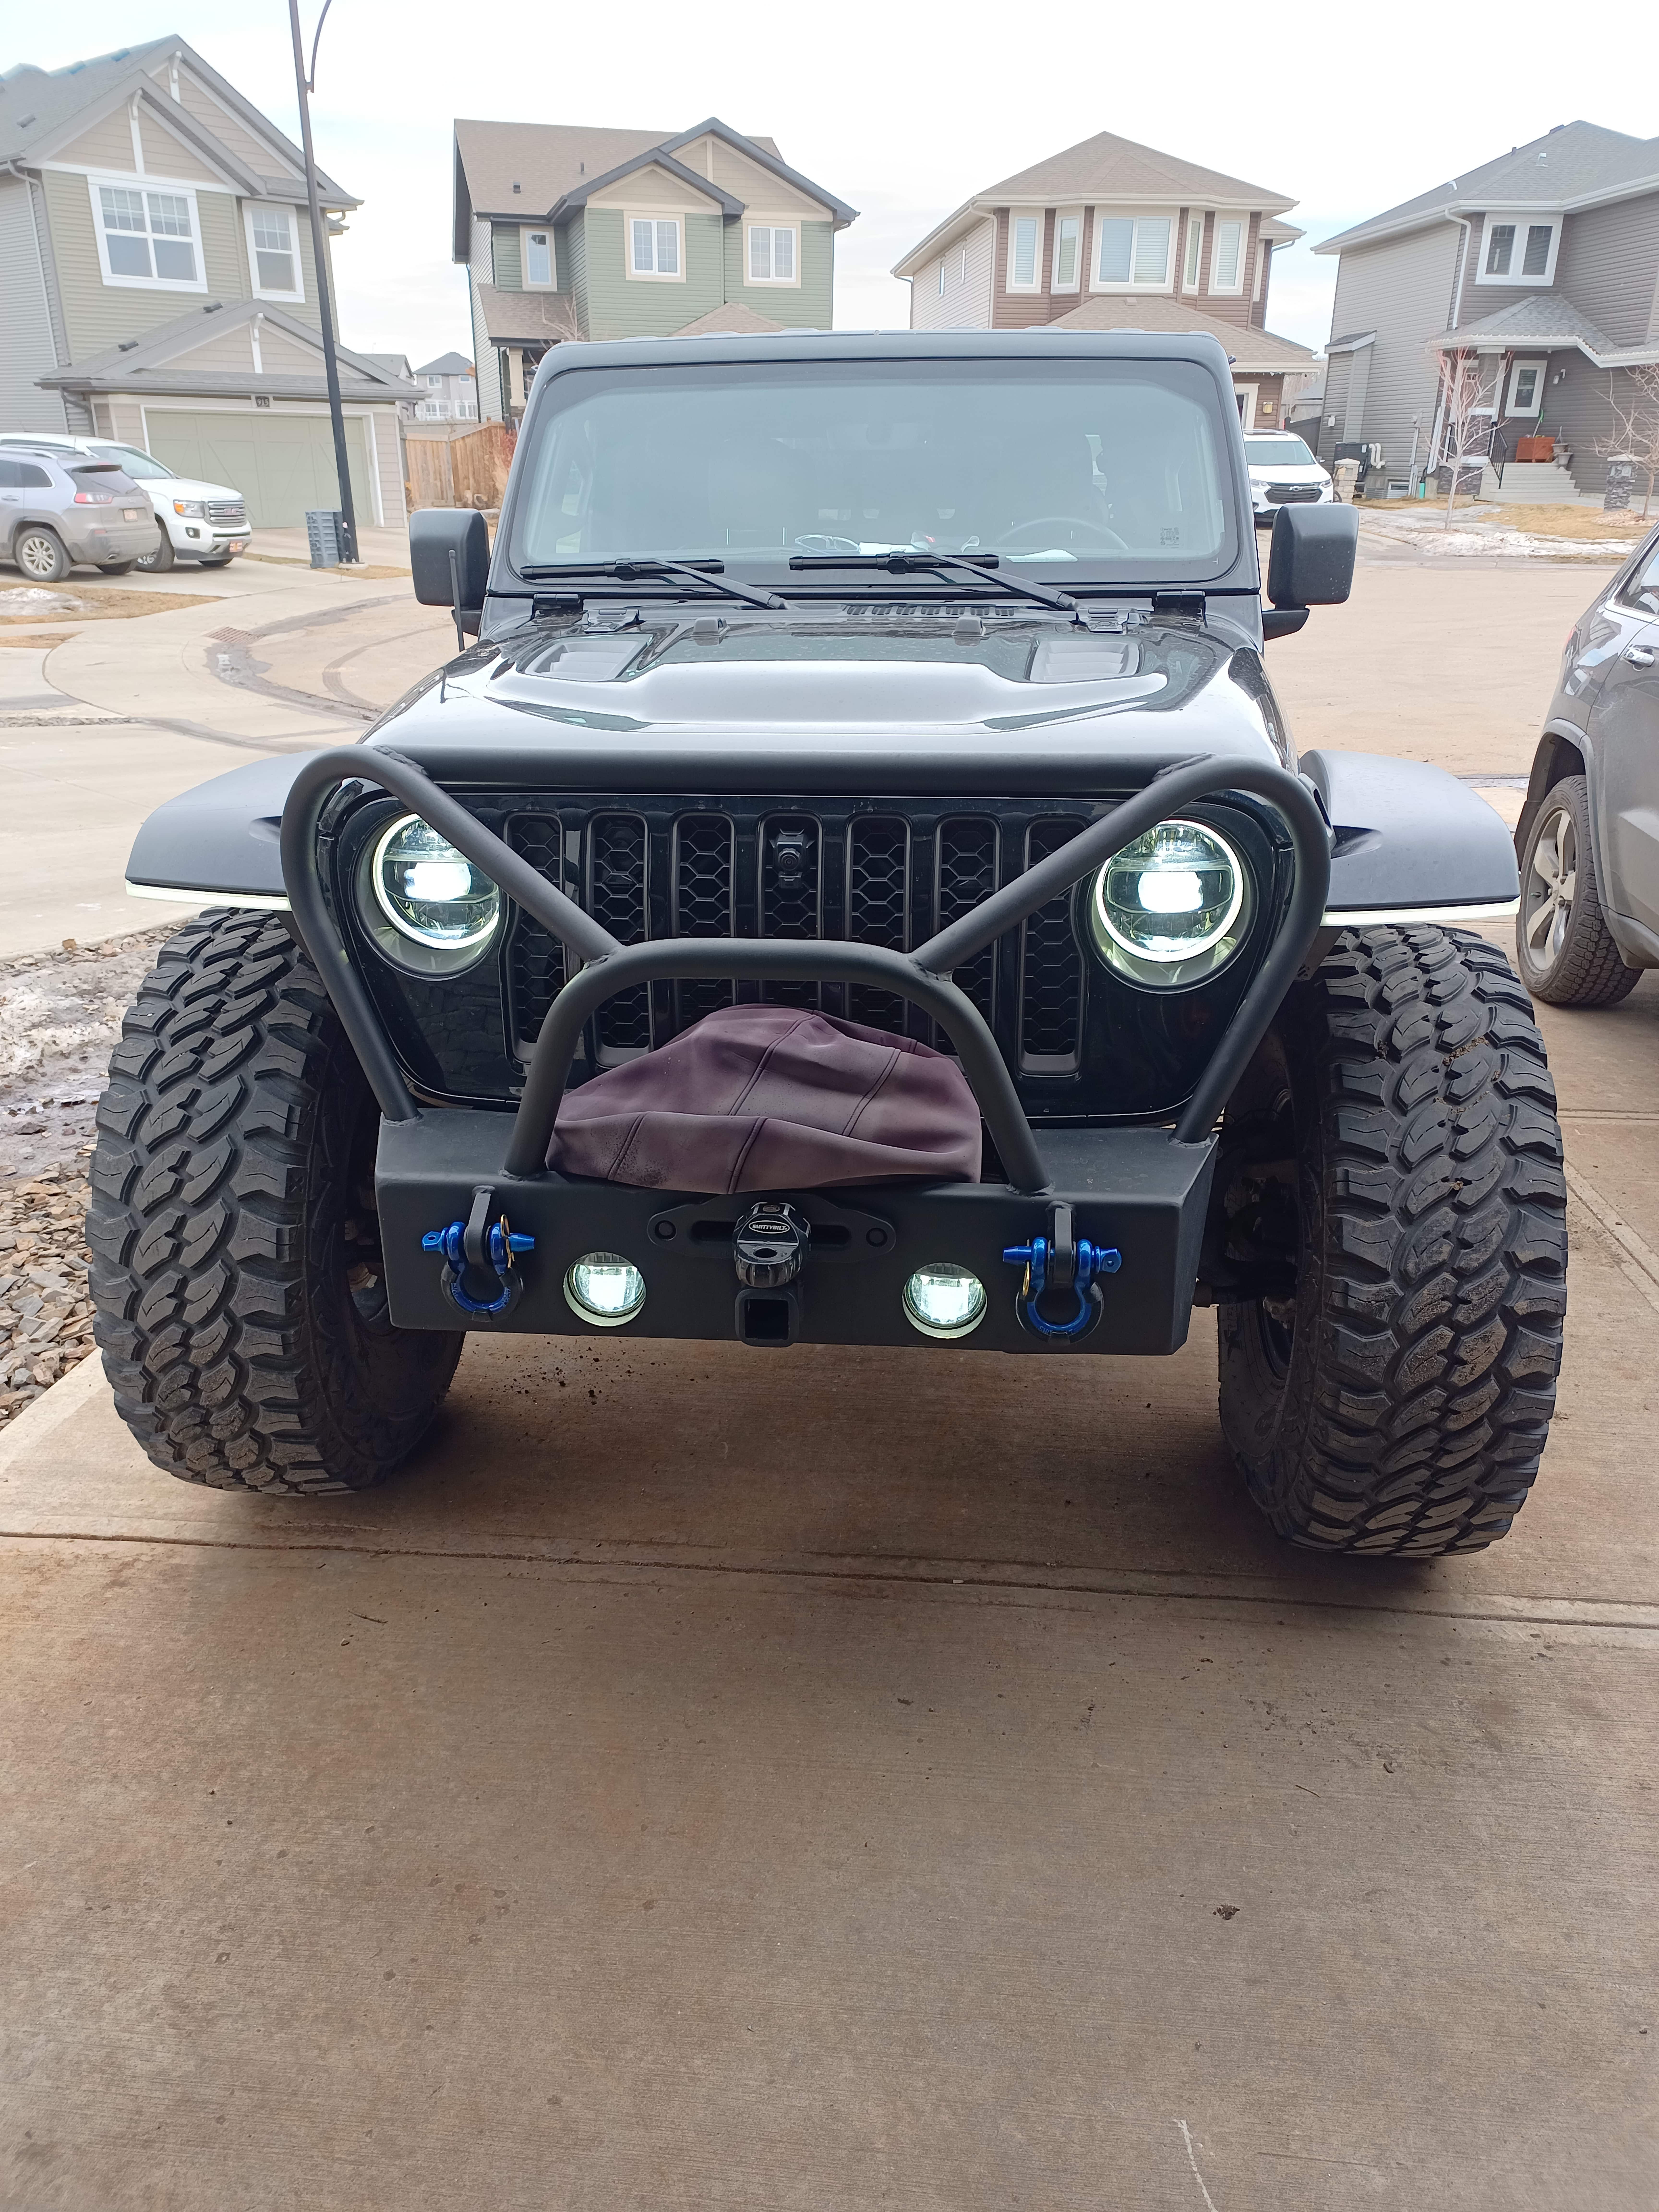 Custom stubby front bumper with full coverage grille guard on a Jeep JT Gladiator